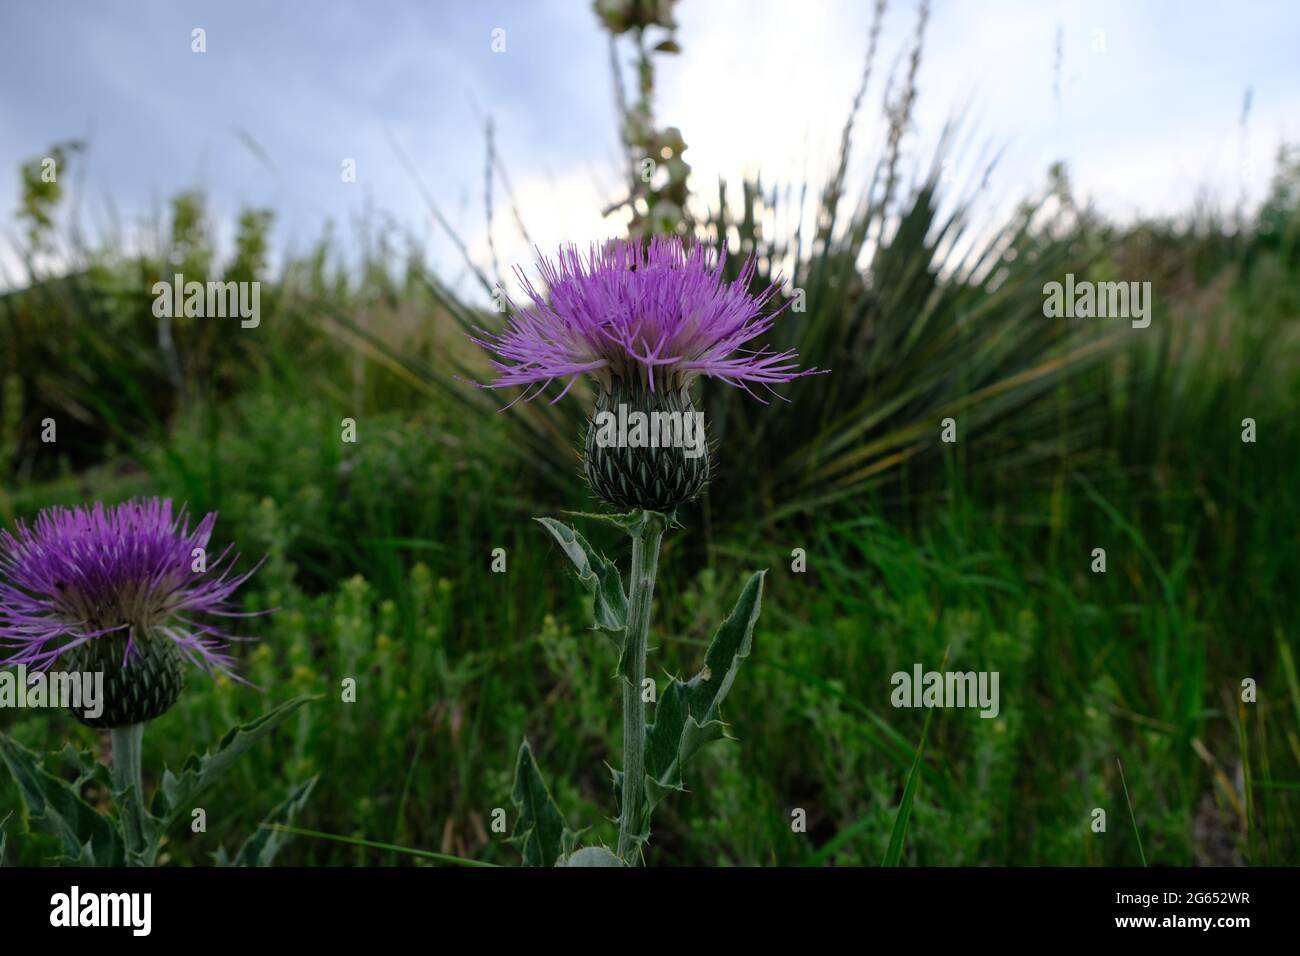 Pasture thistle plant at Matthews Winters Park in Golden Colorado Stock Photo